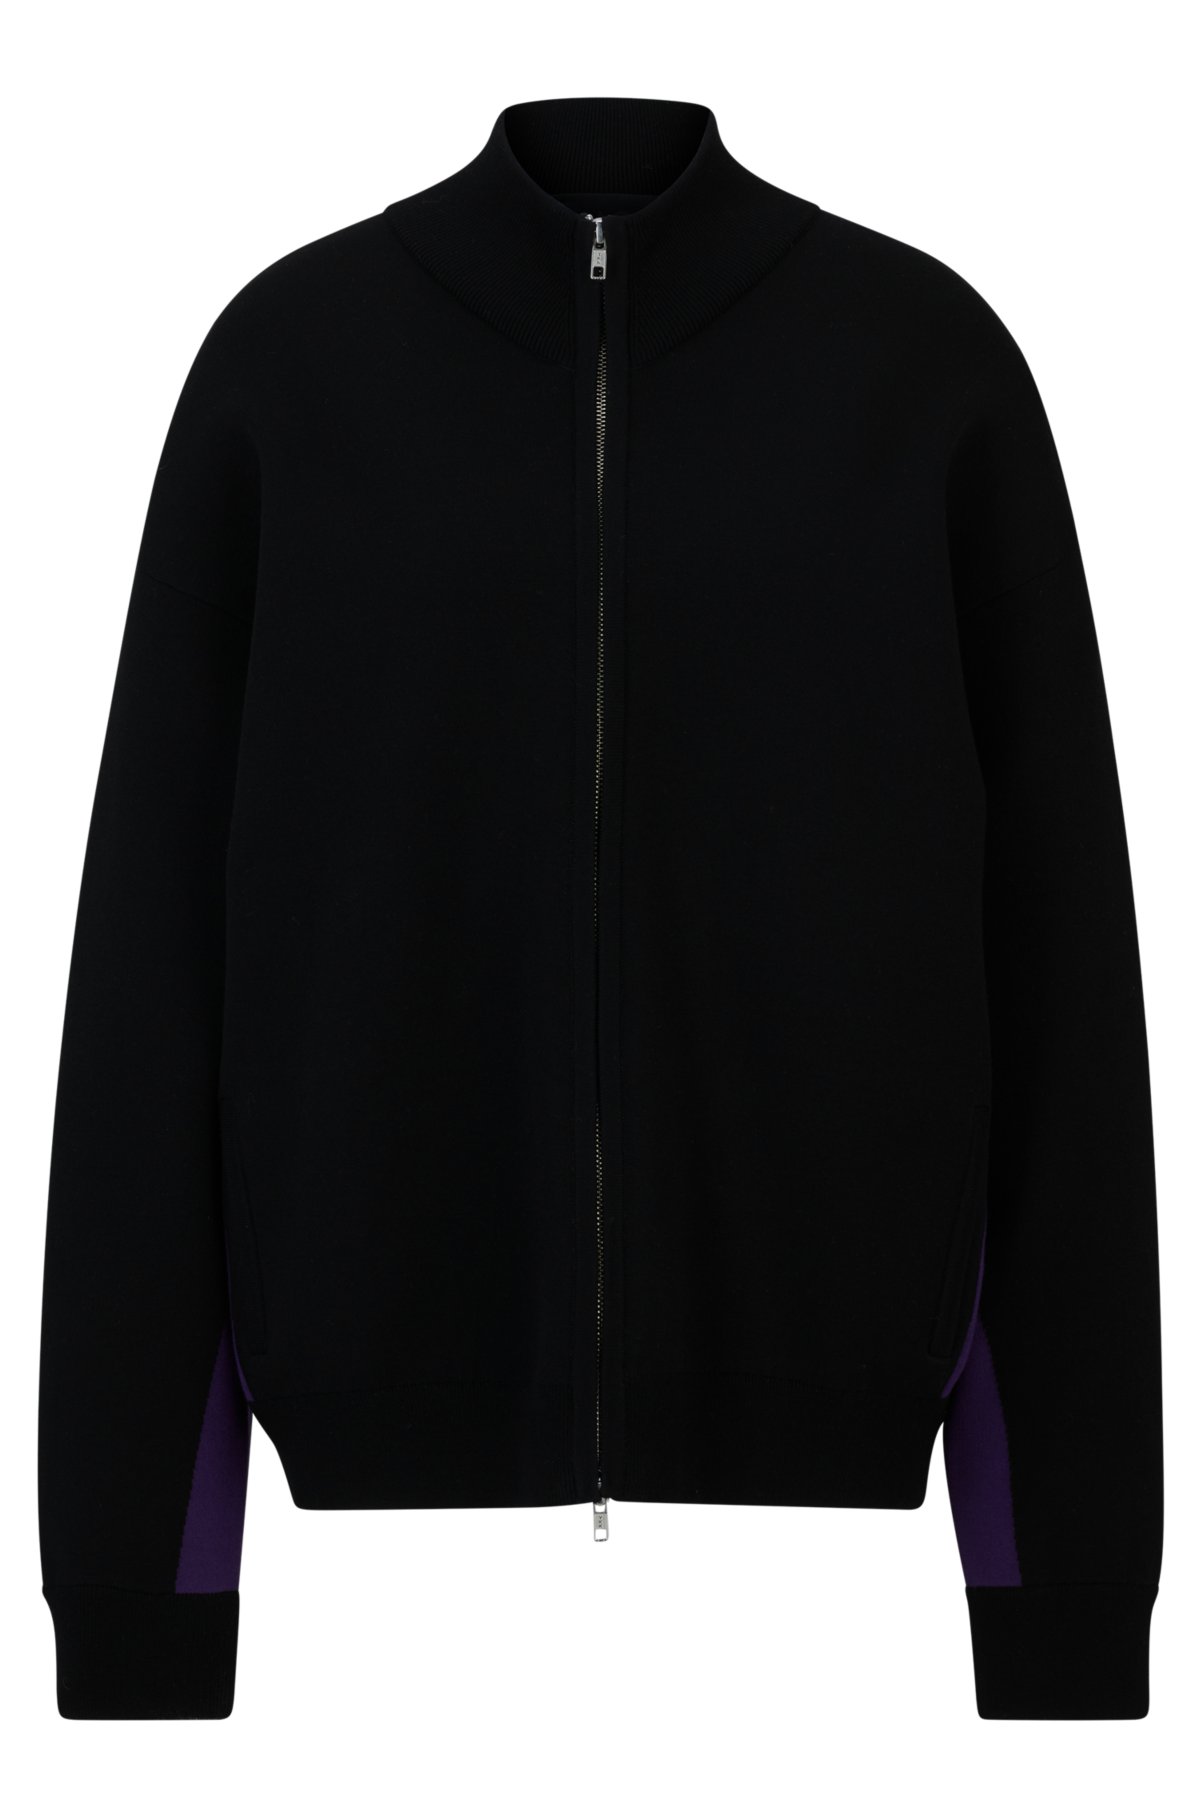 NAOMI x BOSS zip-up knitted jacket with logo patch, Black